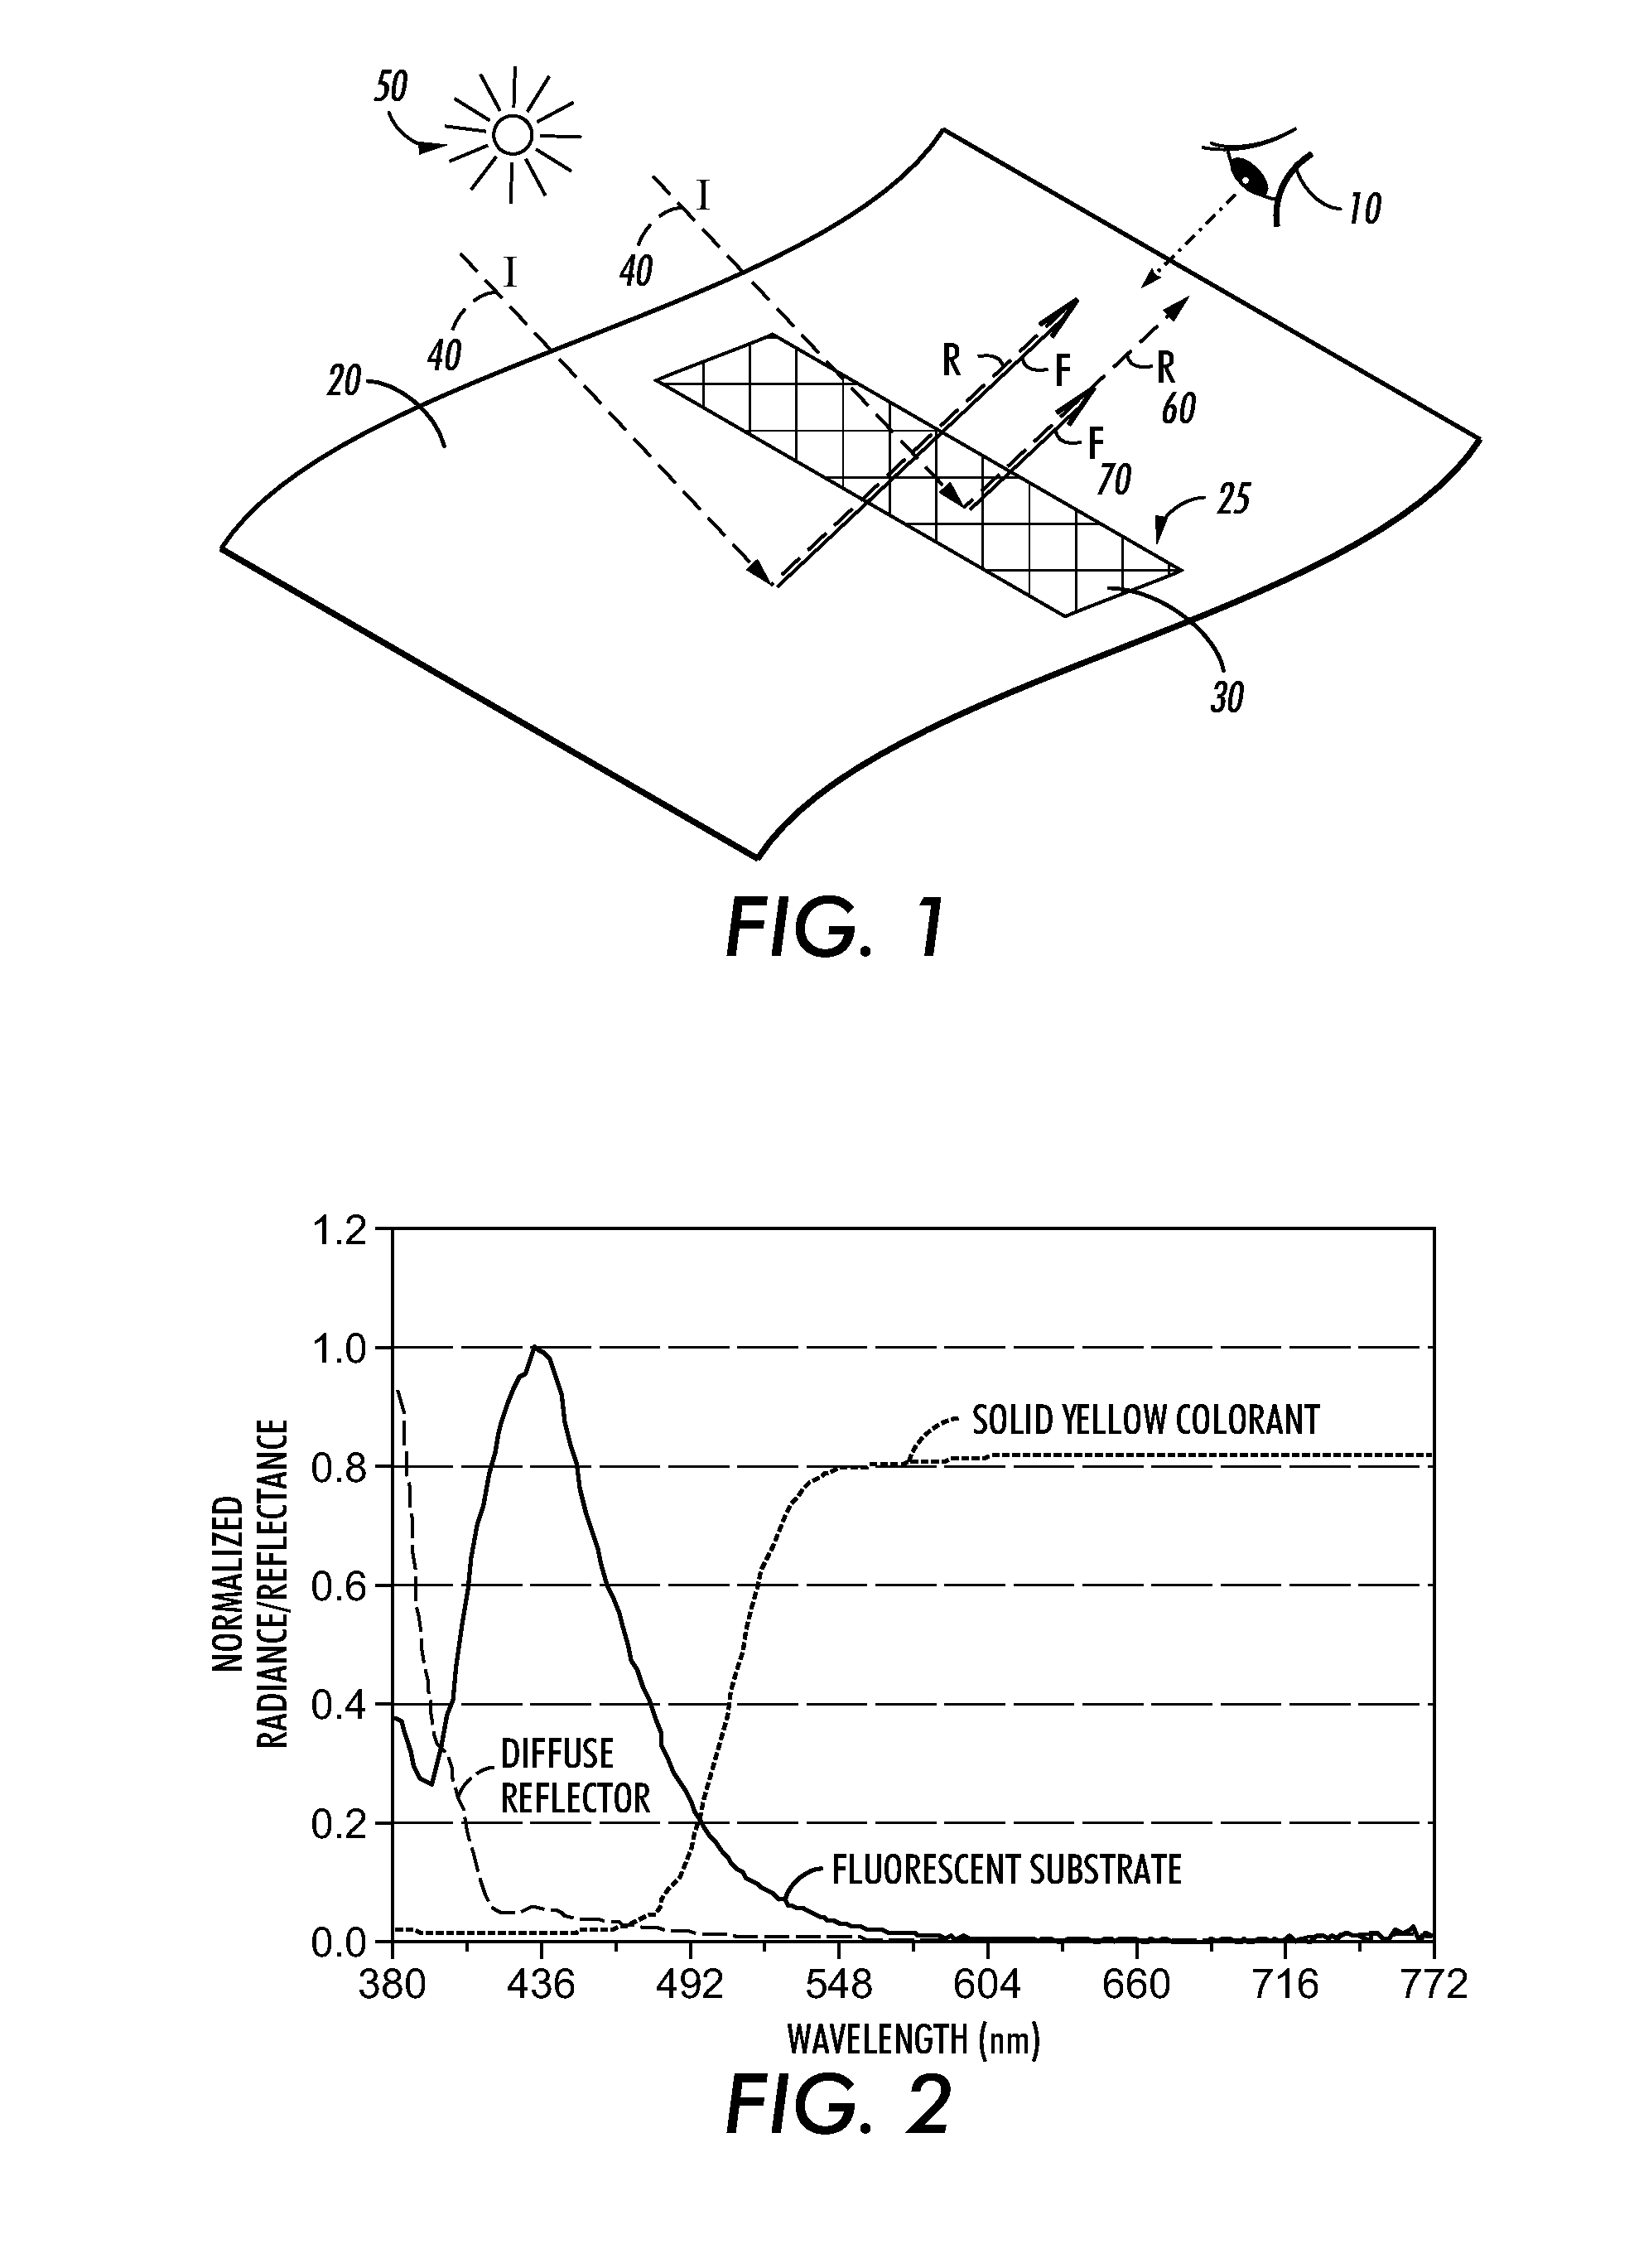 Substrate fluorescent non-overlapping dot patterns for embedding information in printed documents